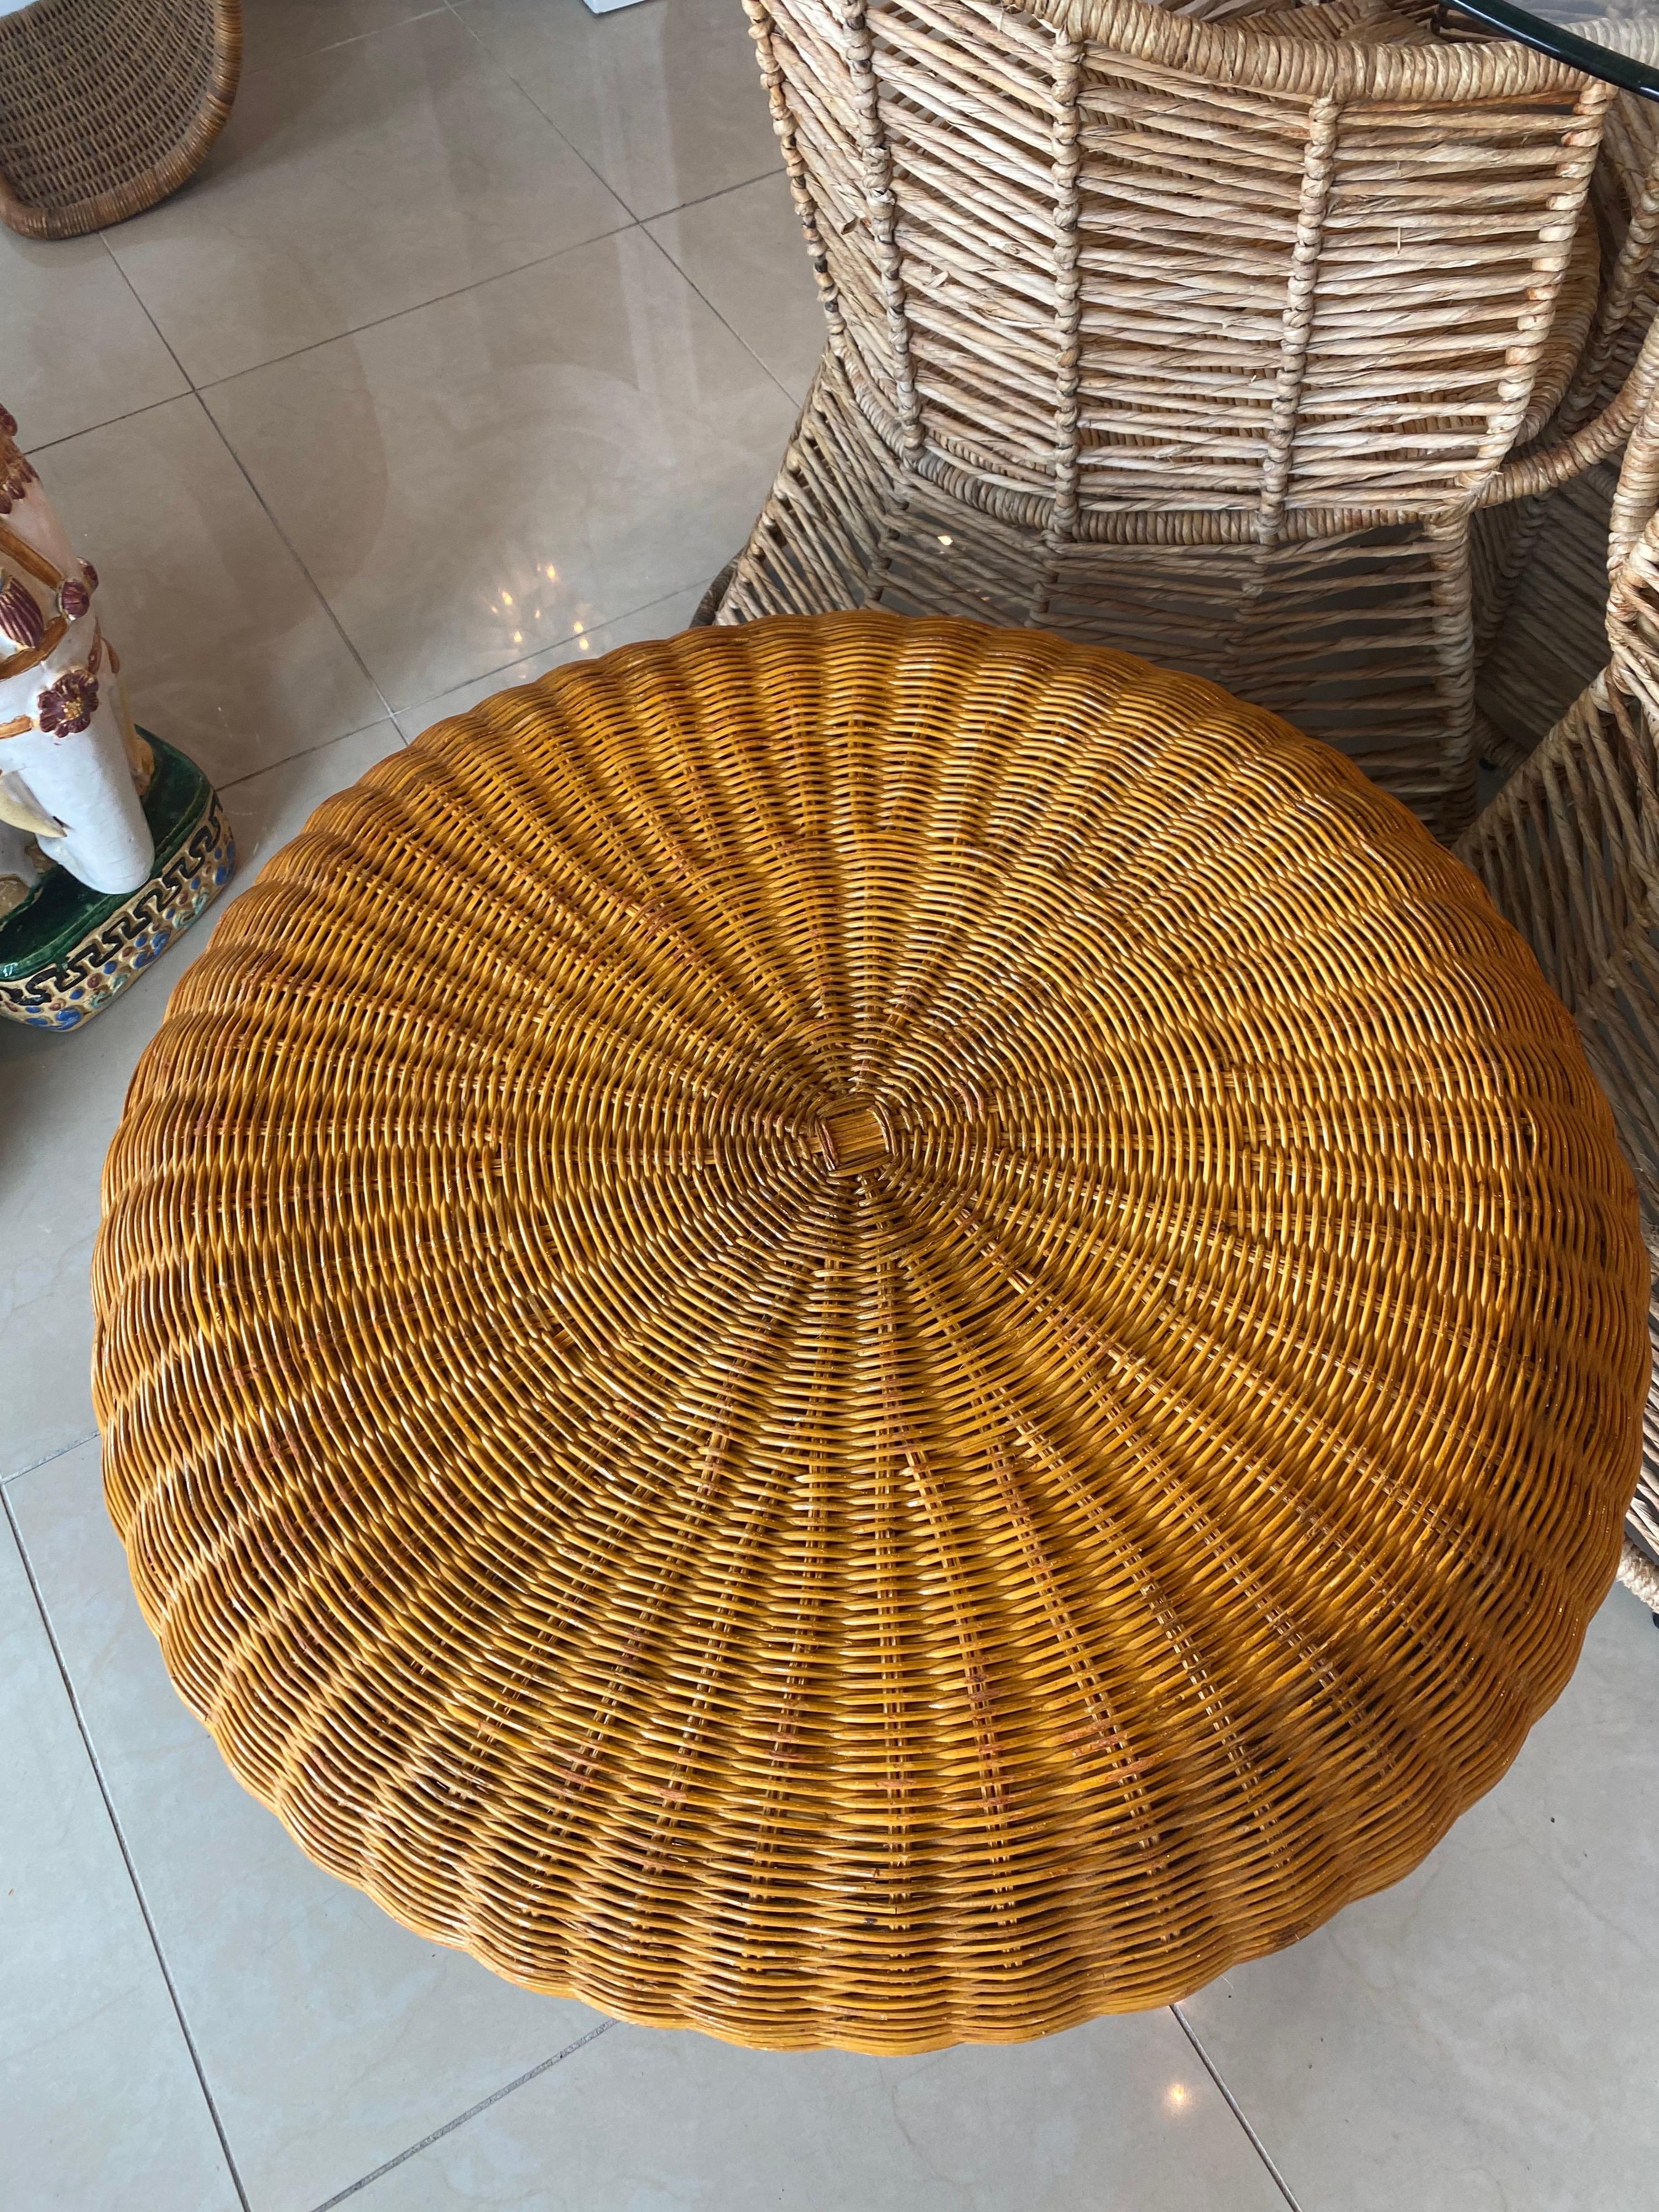 Lovey vintage wicker coffee table in the shape of a mushroom. Mo damage to wicker. You could also add a glass top to this.